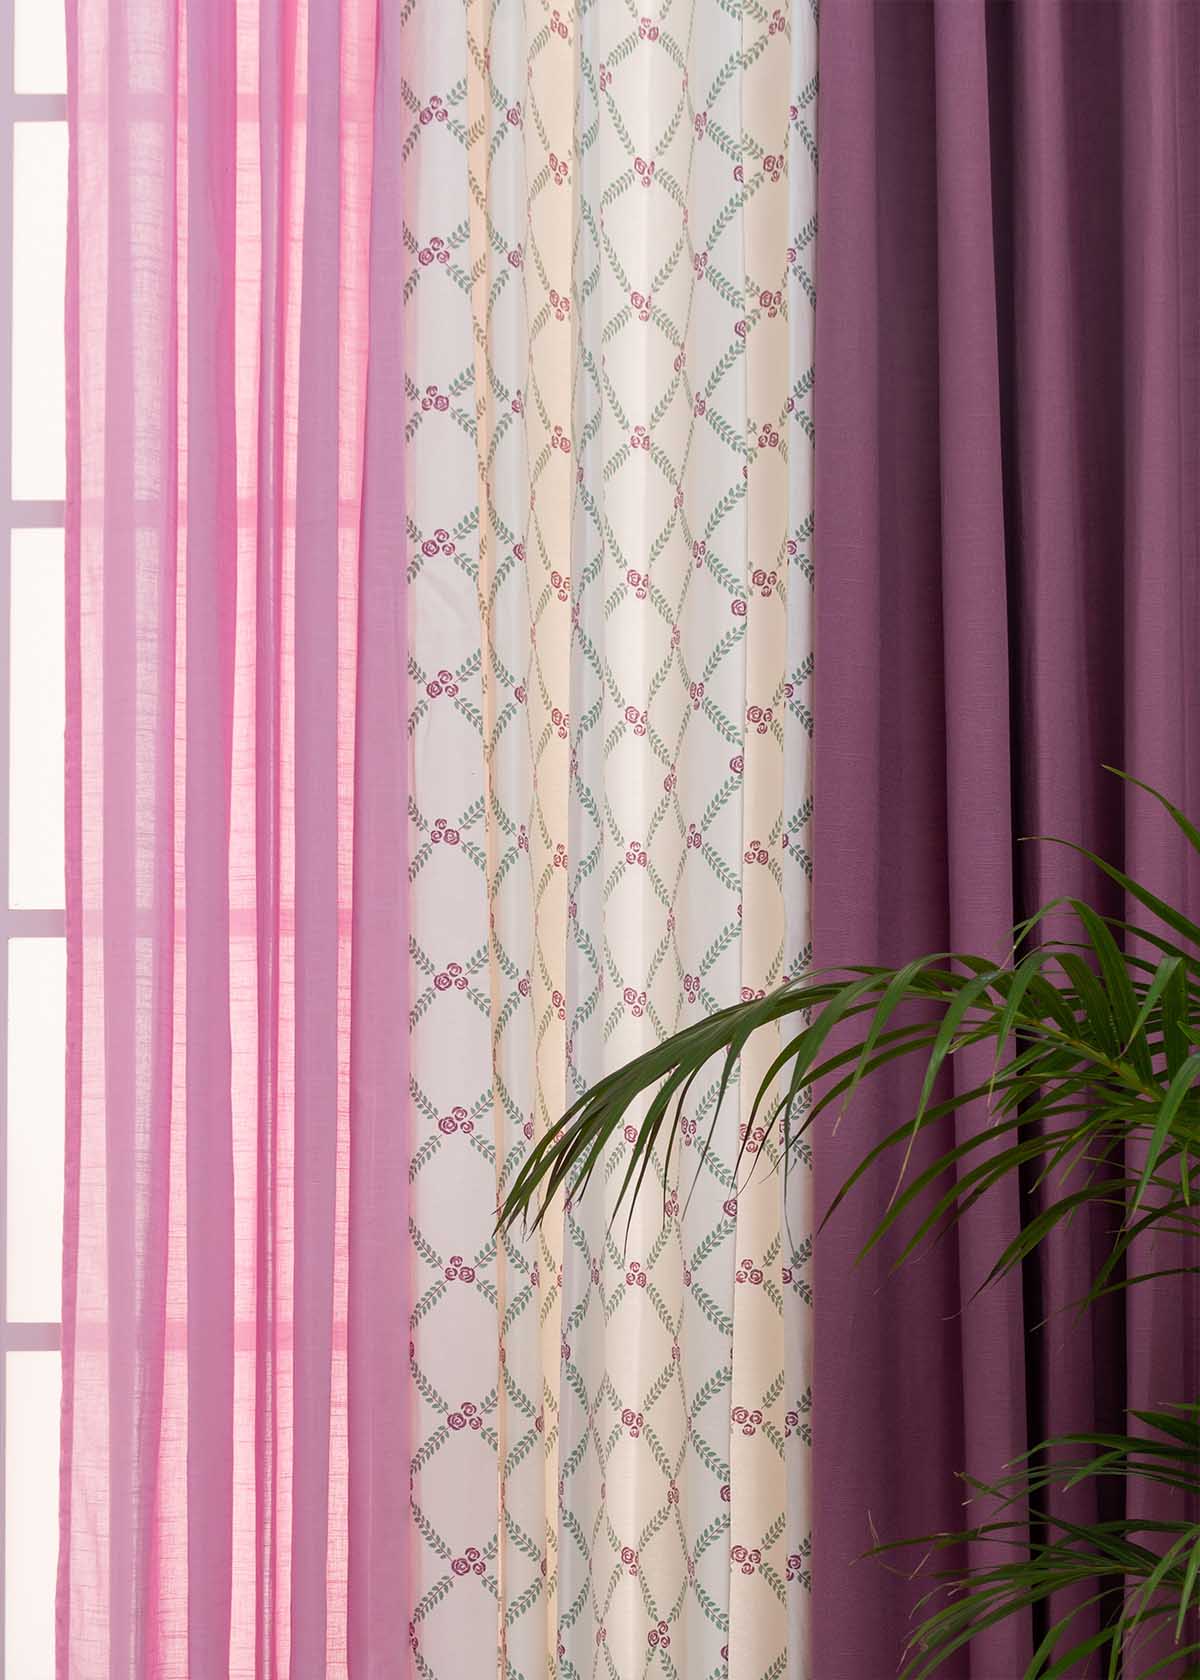 Grape Solid, Climbing Roses In Lavender, Dusty Lavender Sheer Set Of 3 Combo Cotton Curtain - Grape Lavender